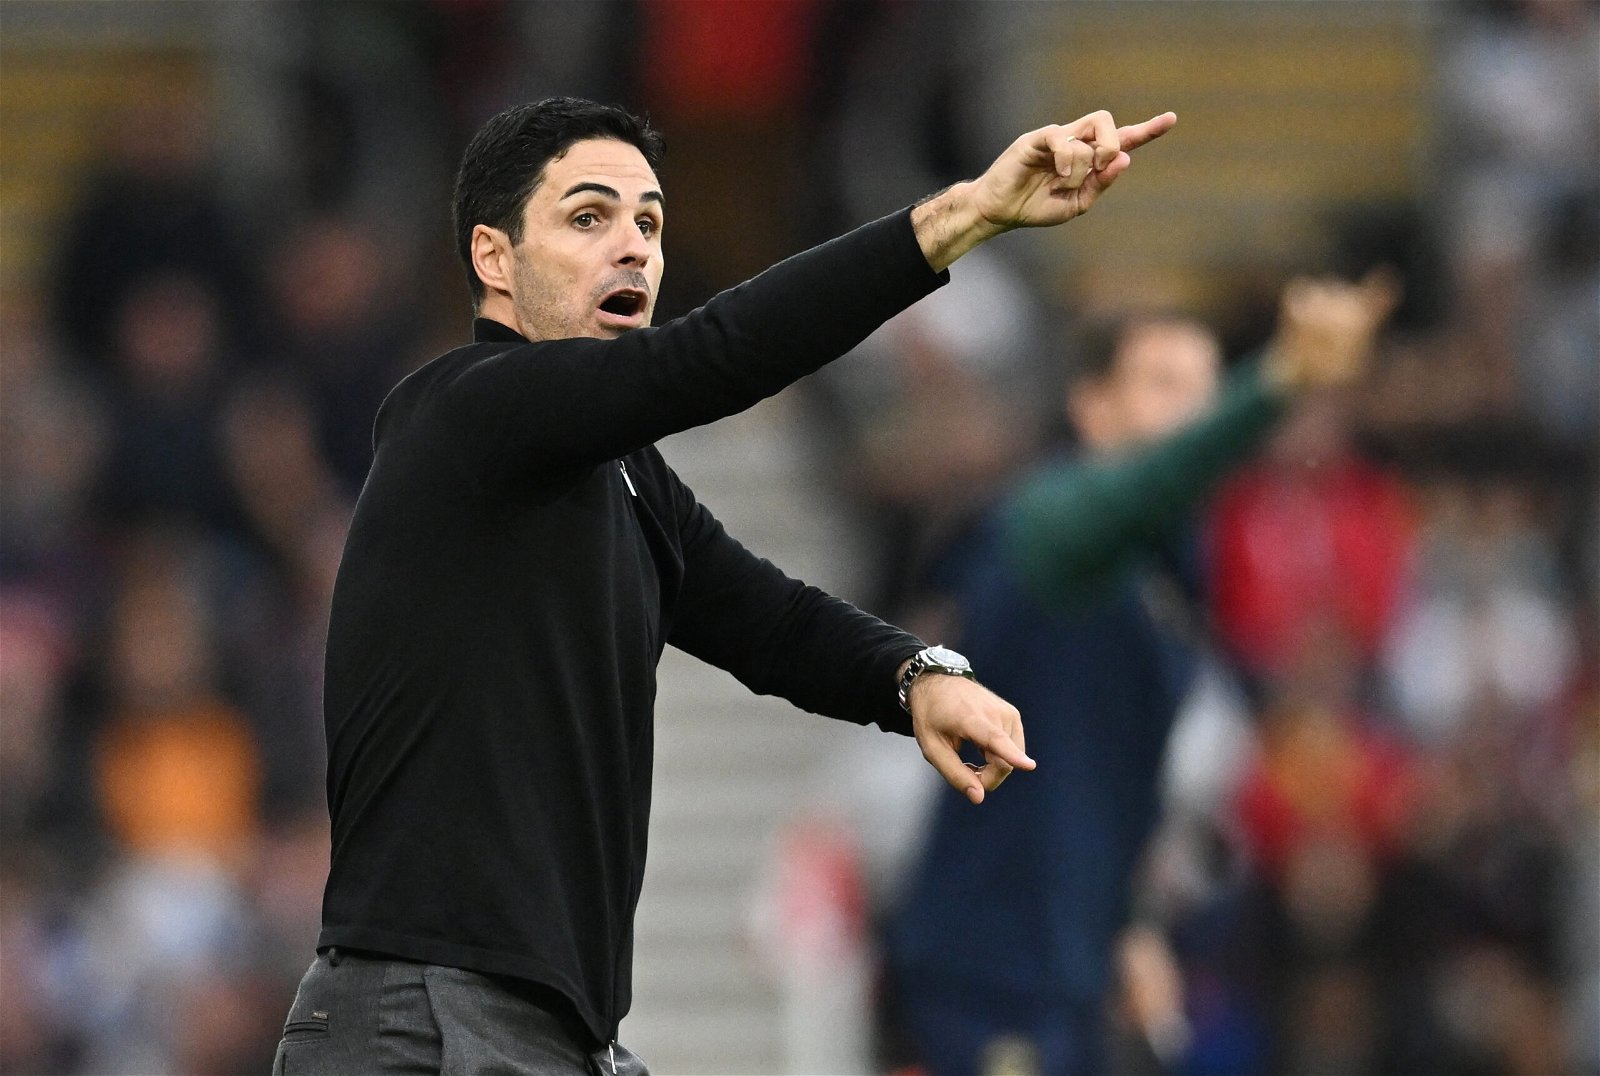 Arsenal manager Mikel Arteta shouts instructions to his team